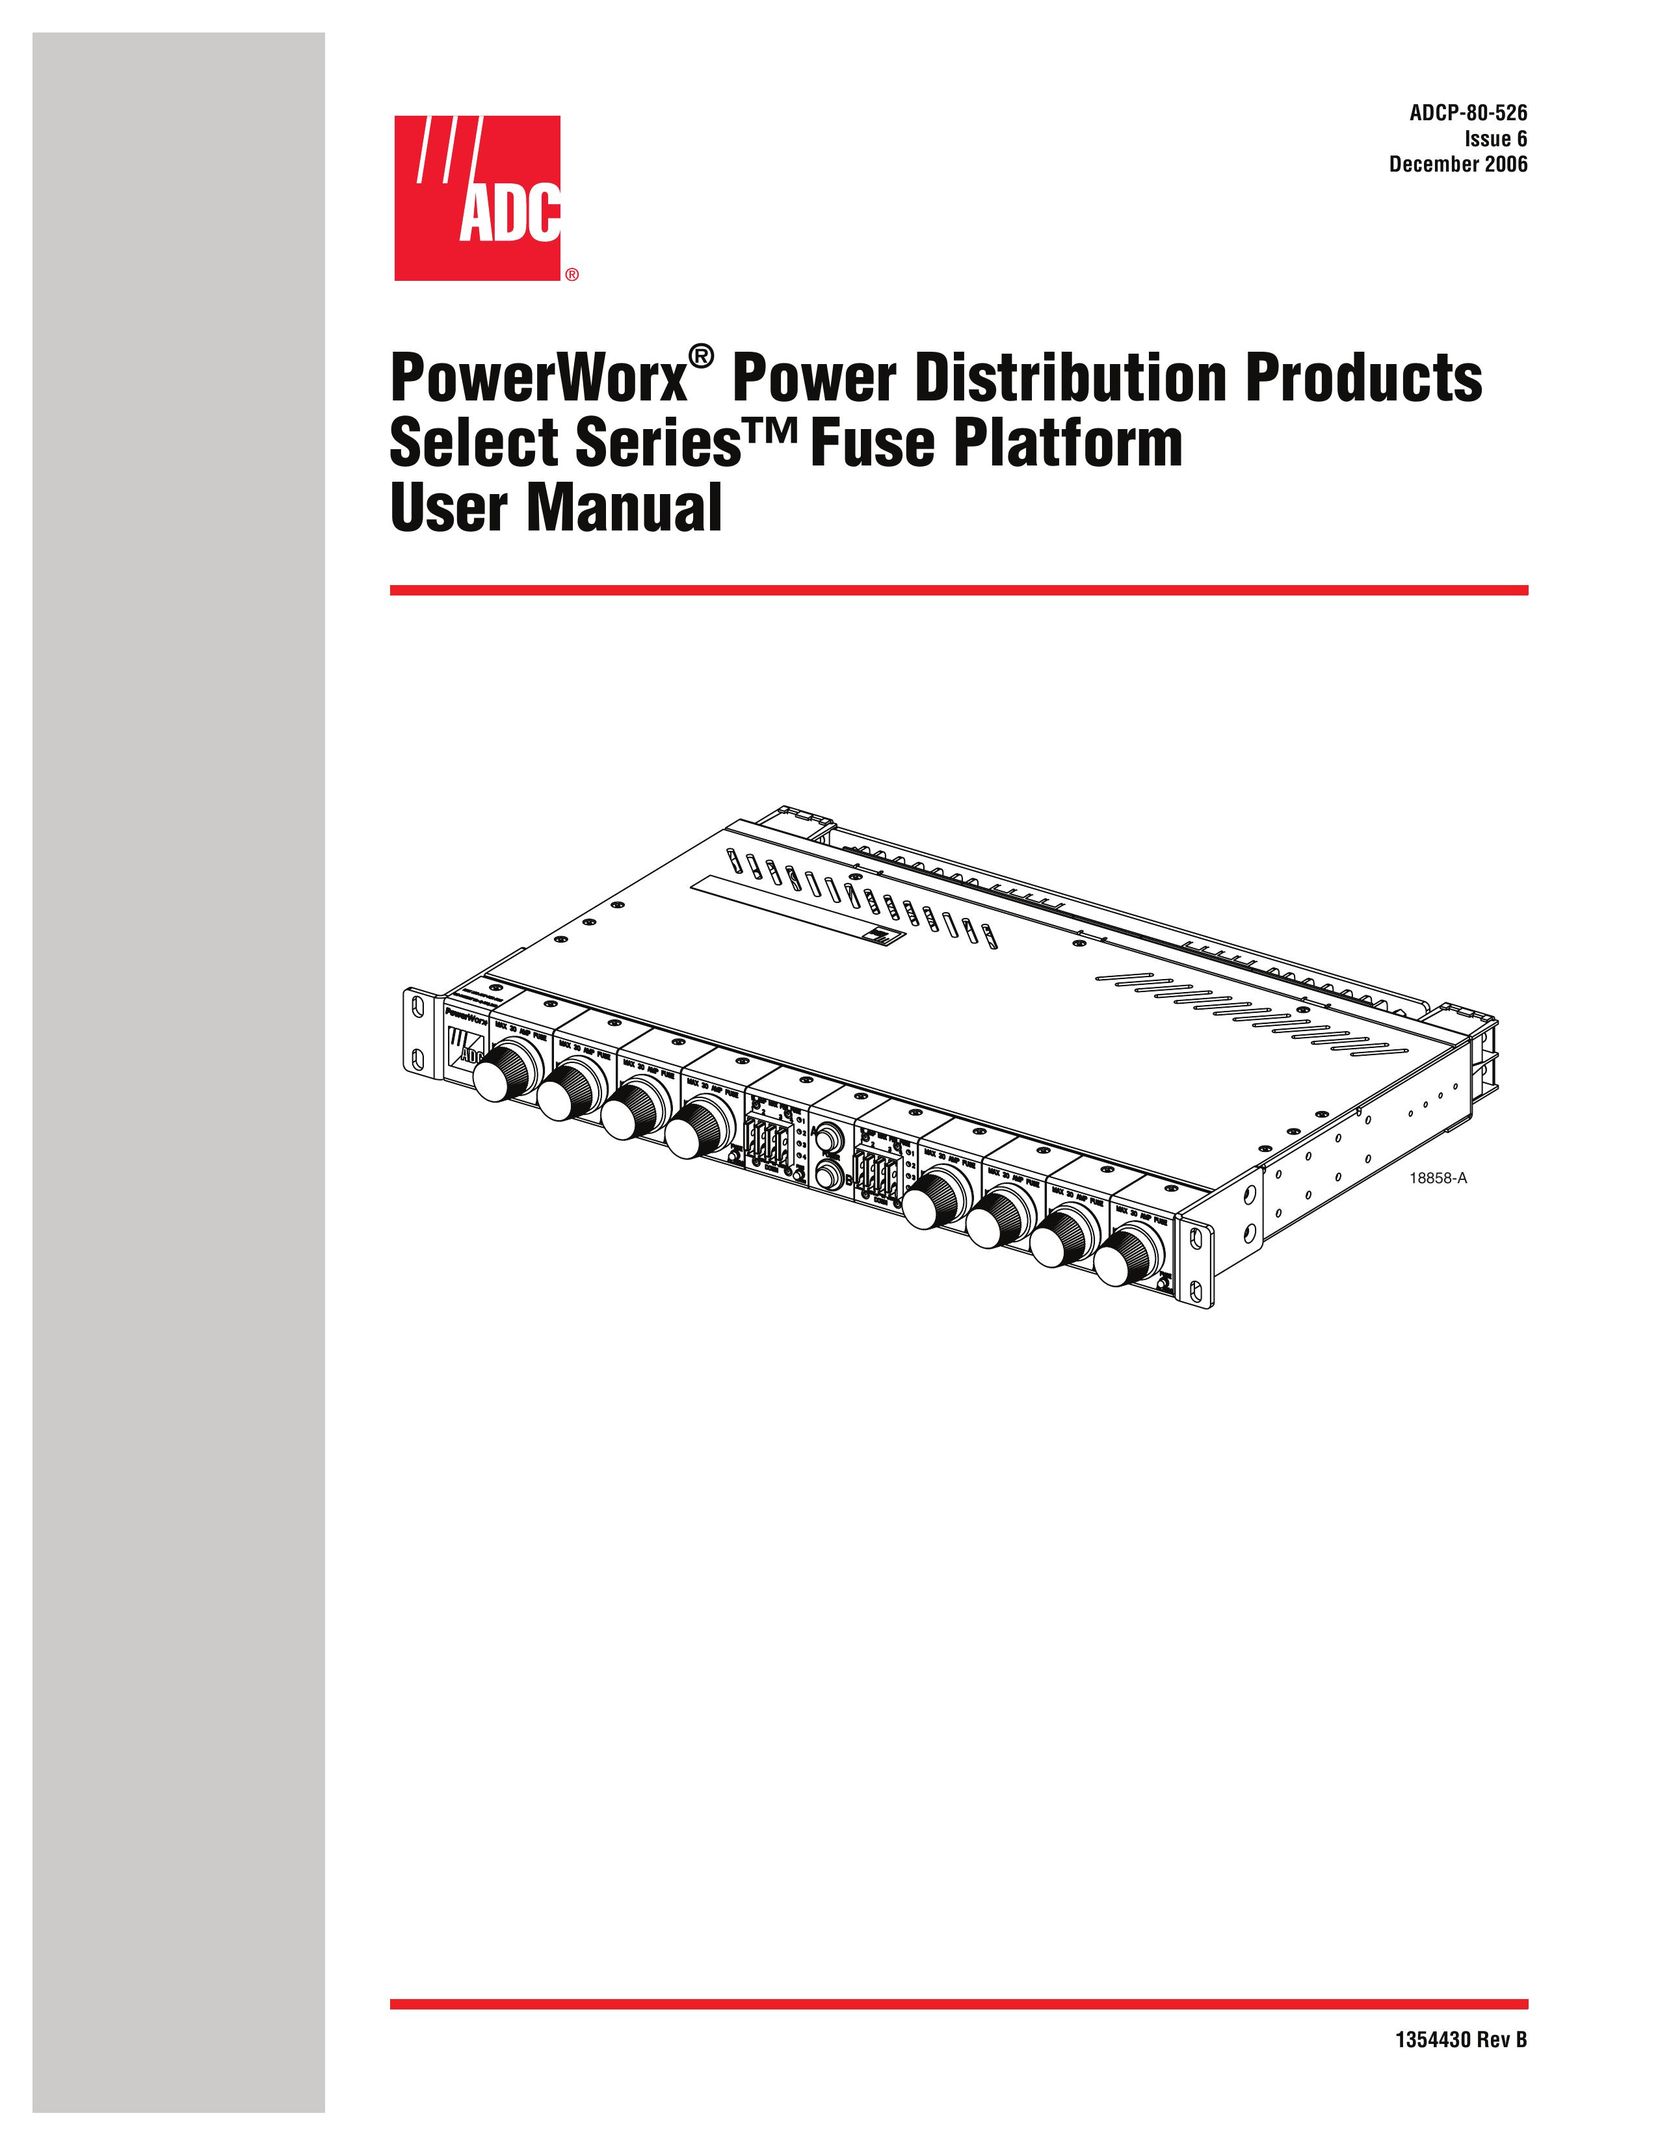 ADC Power Distribution Products Power Supply User Manual